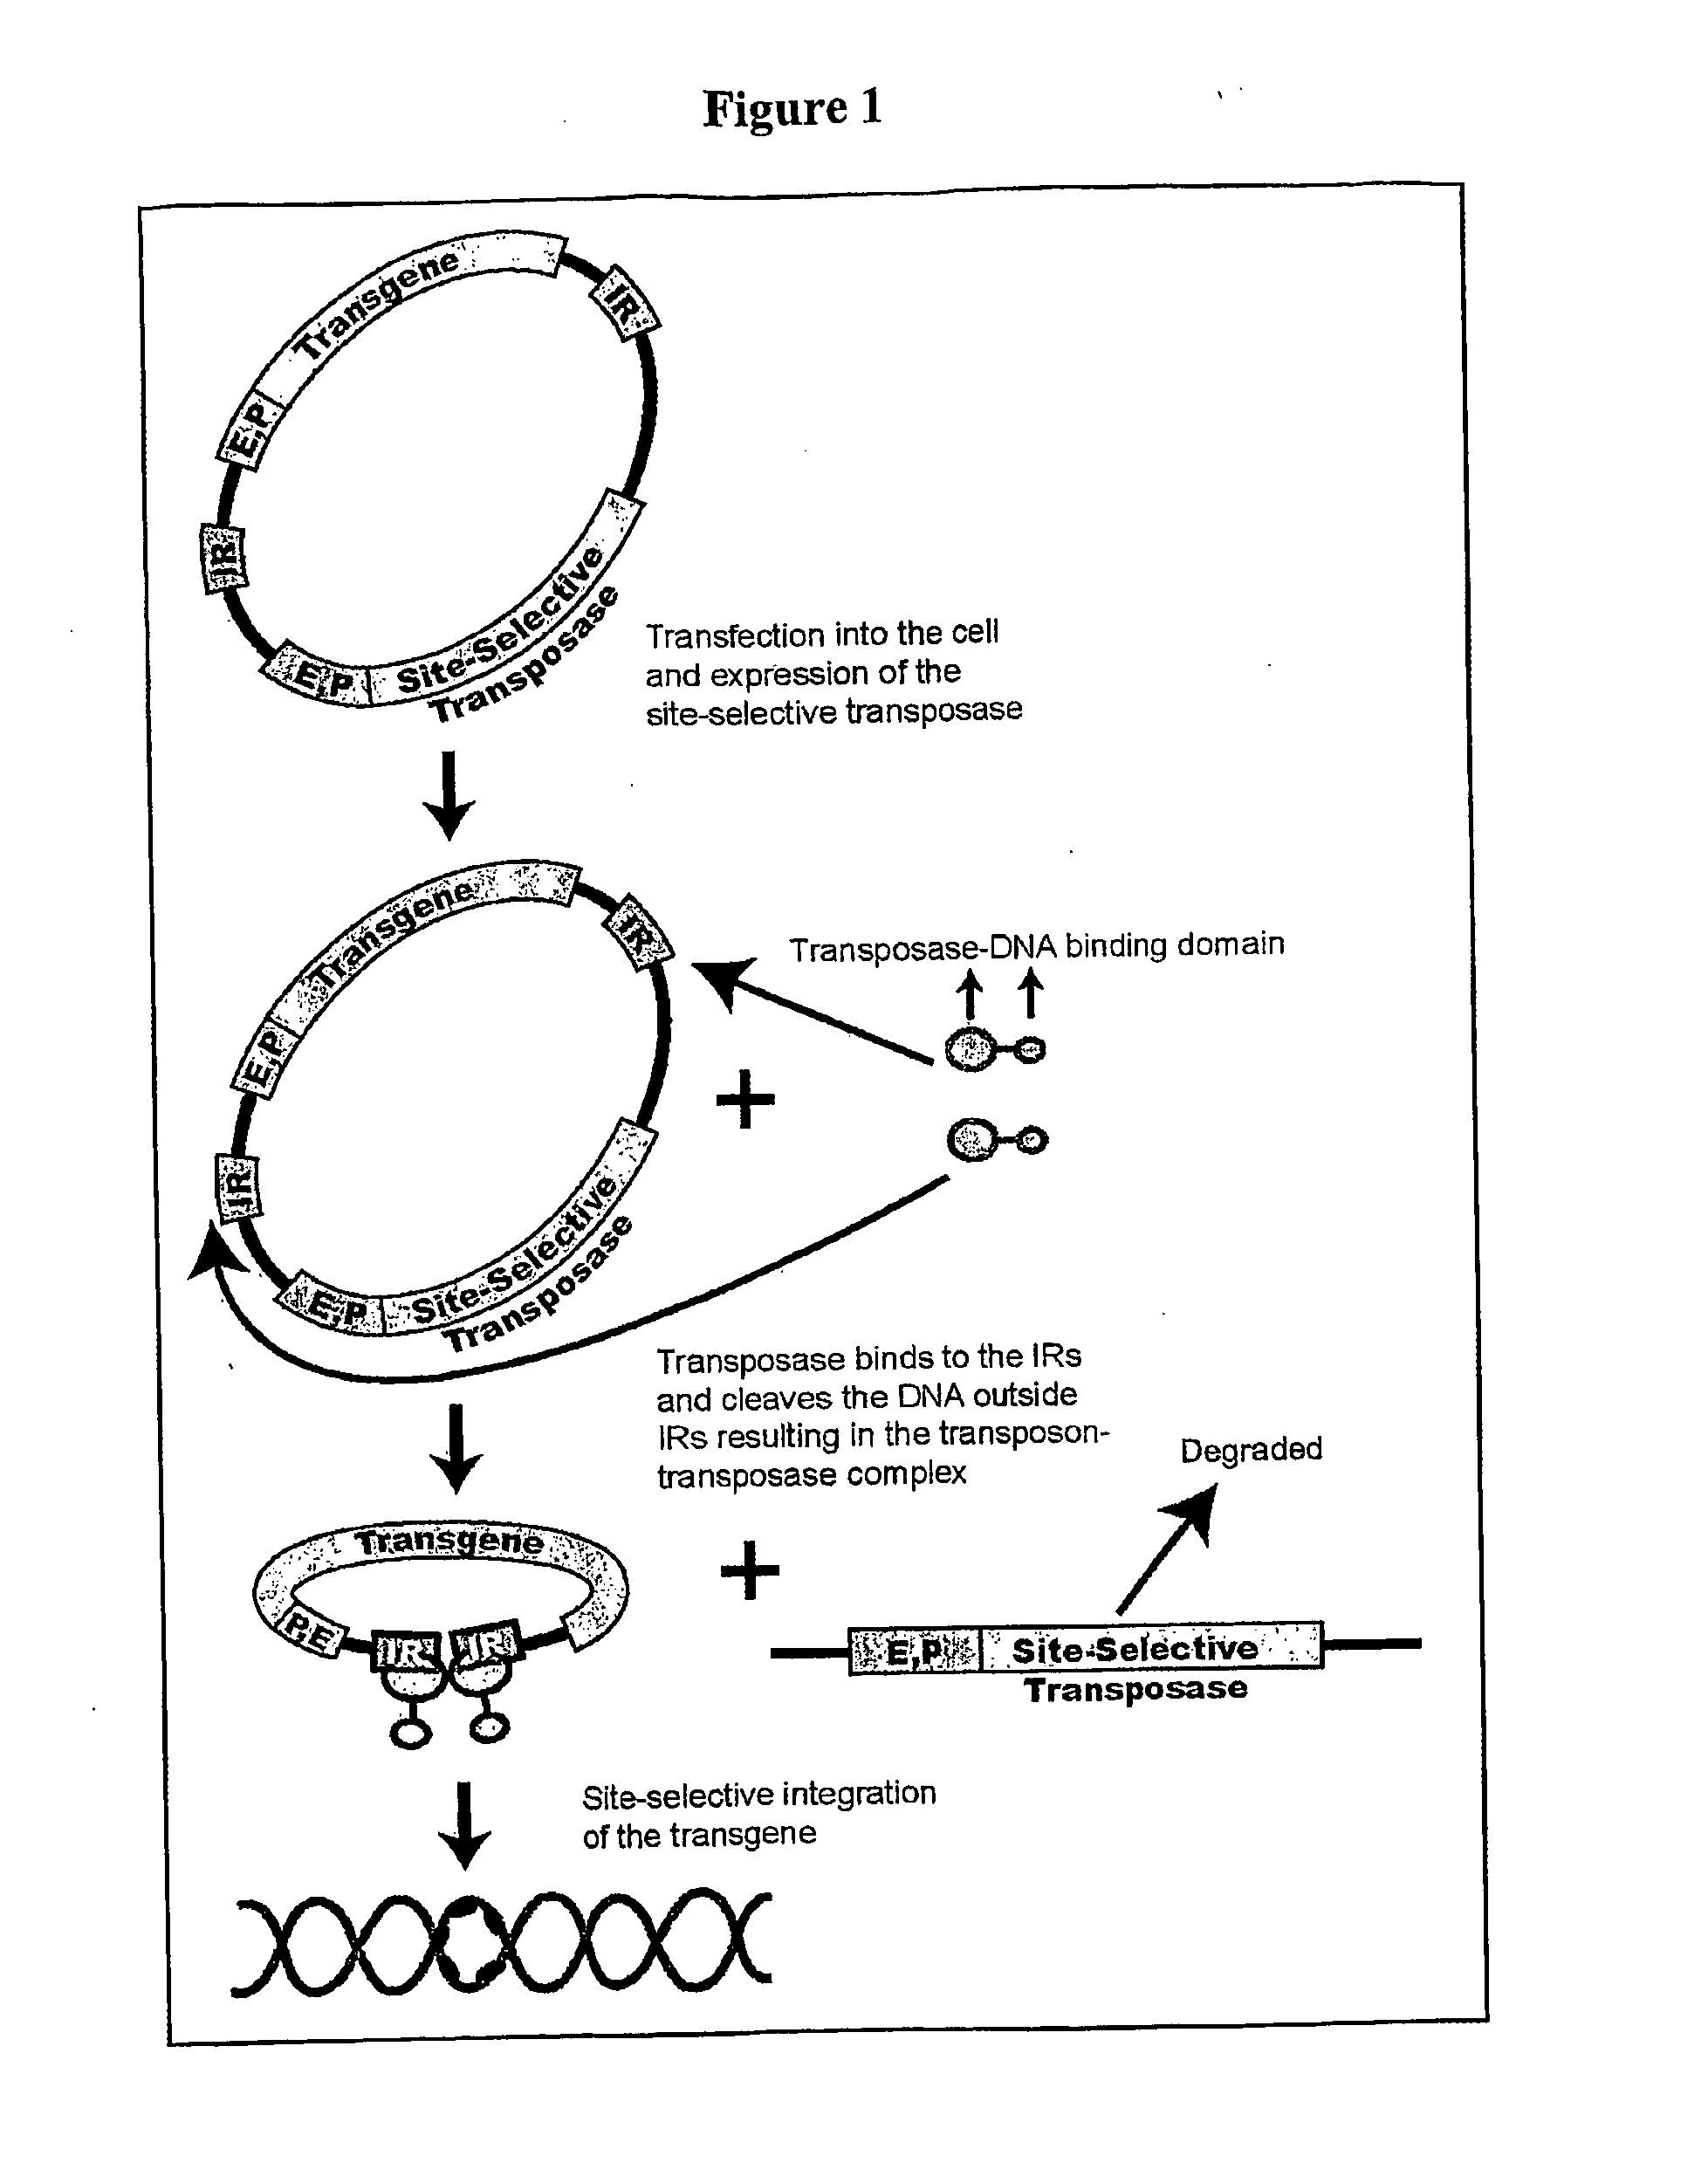 Transposon-based vectors and methods of nucleic acid integration